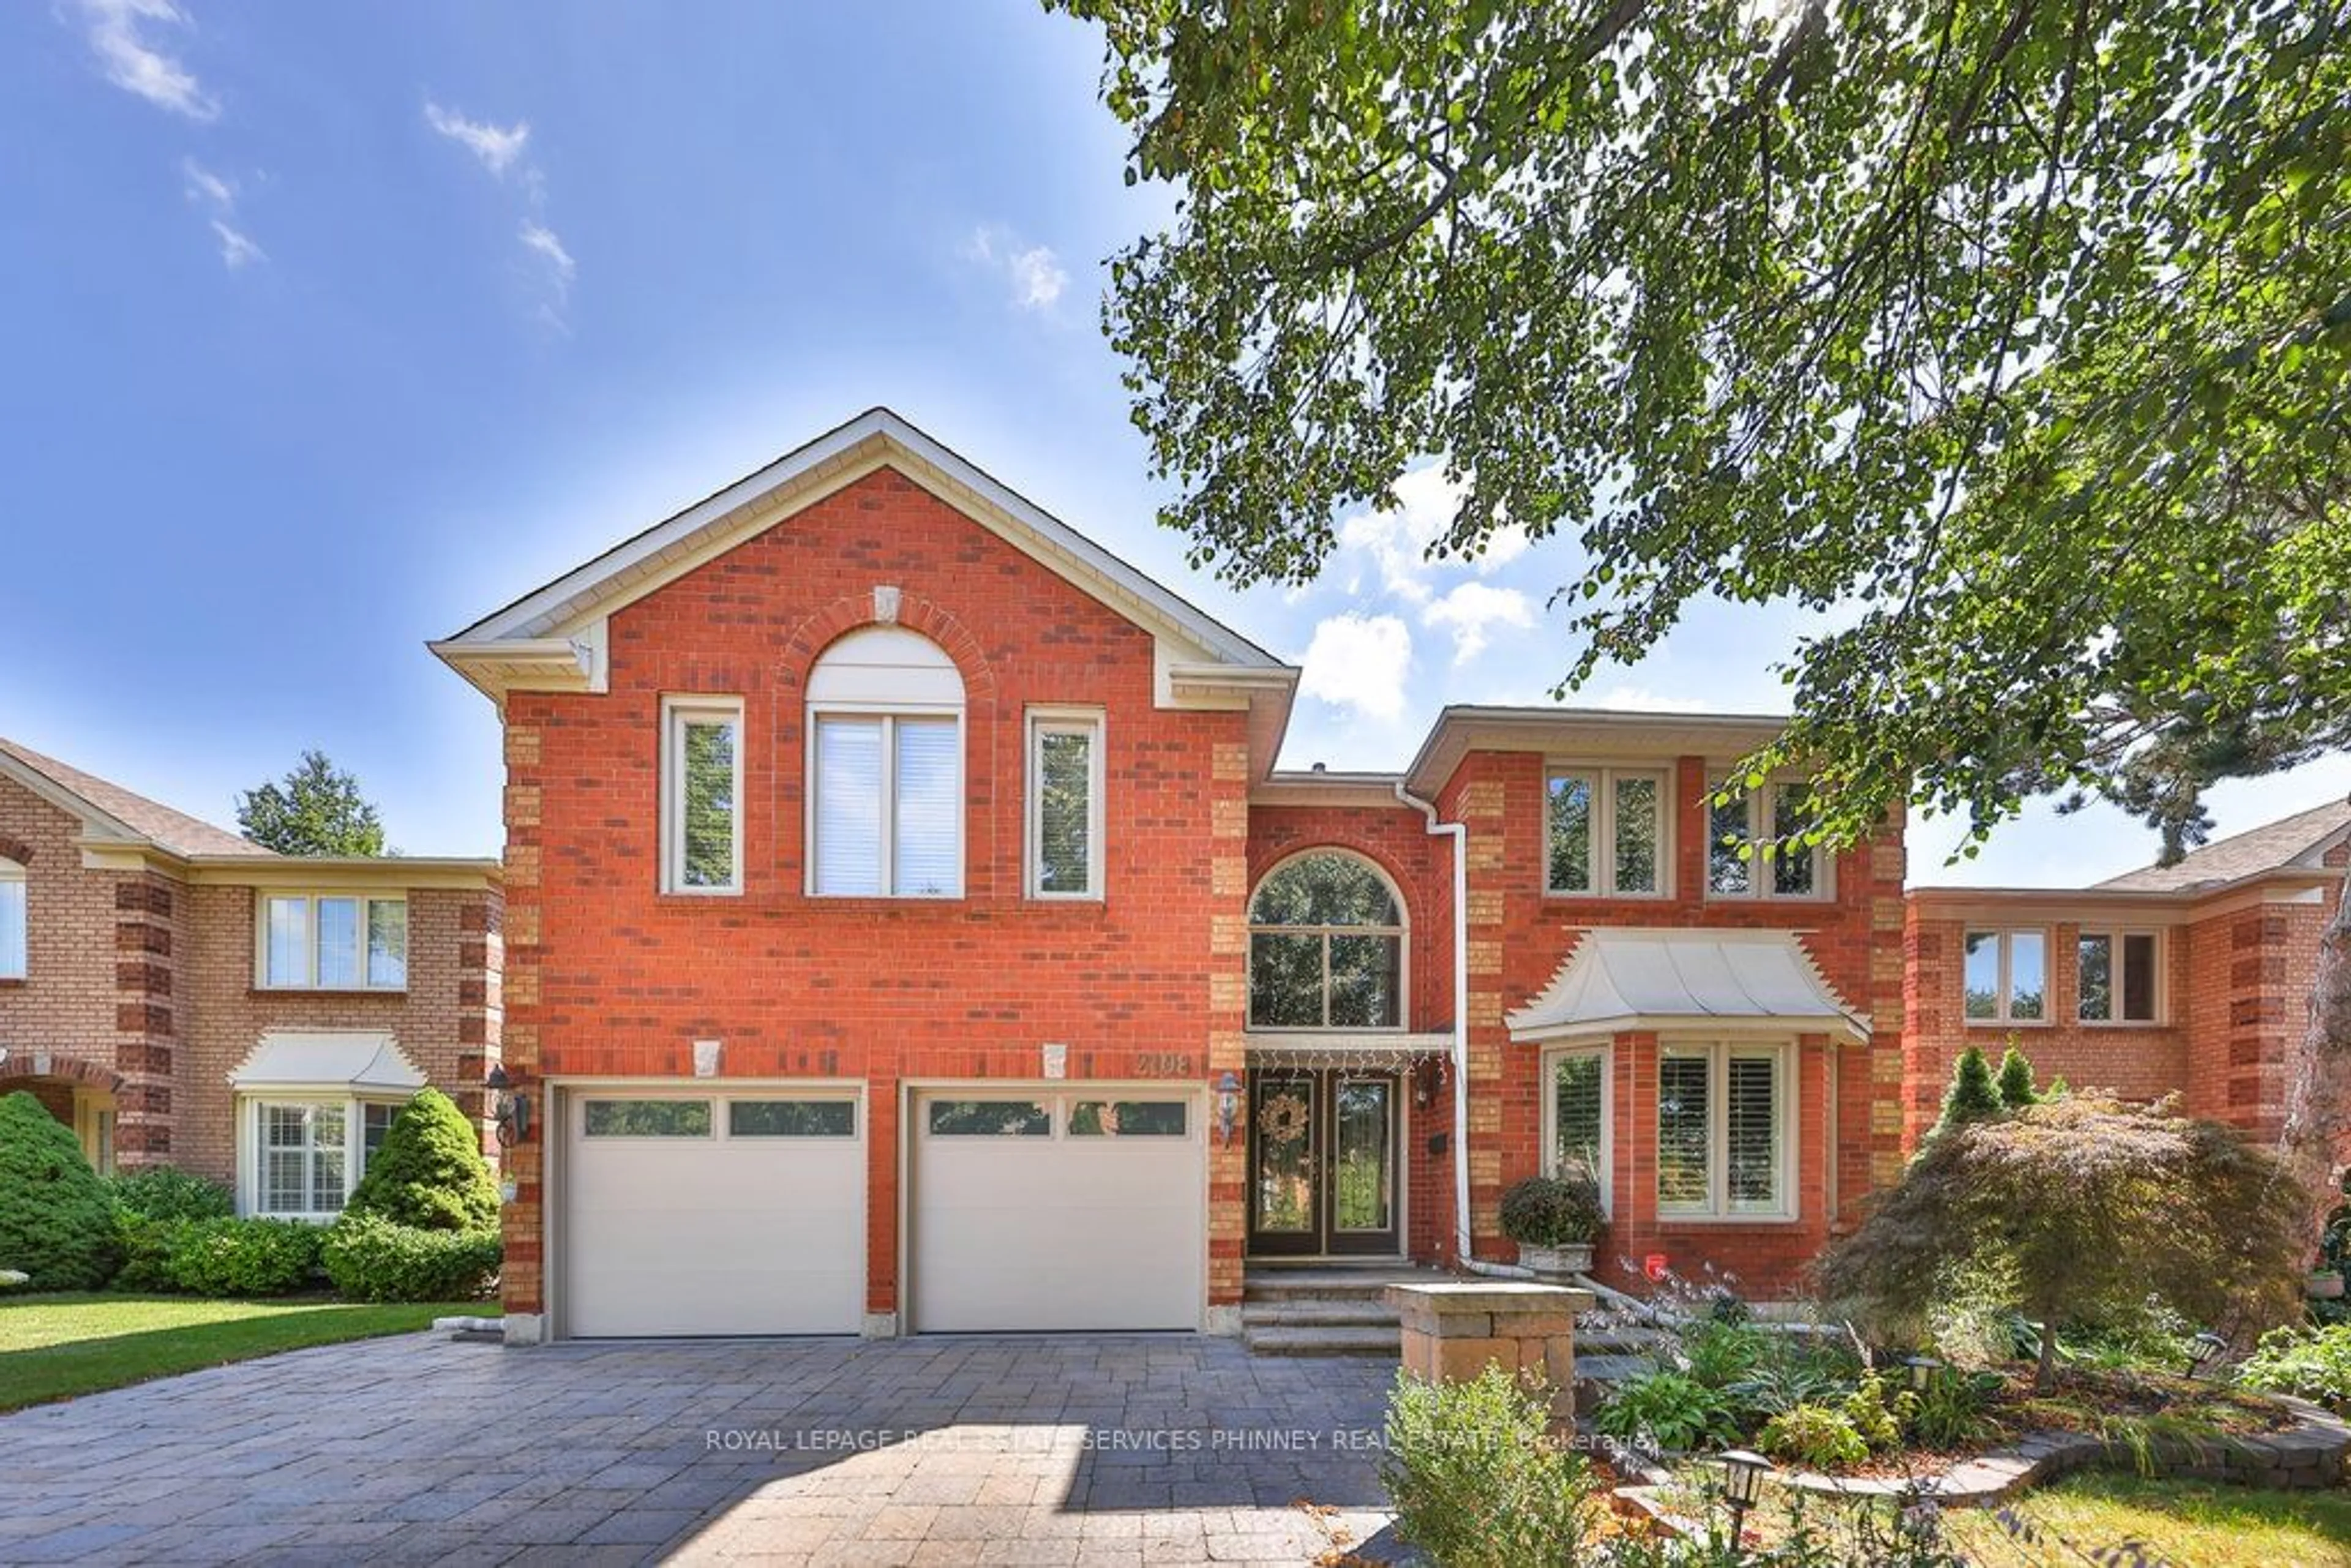 Home with brick exterior material for 2108 Schoolmaster Circ, Oakville Ontario L6M 3A2